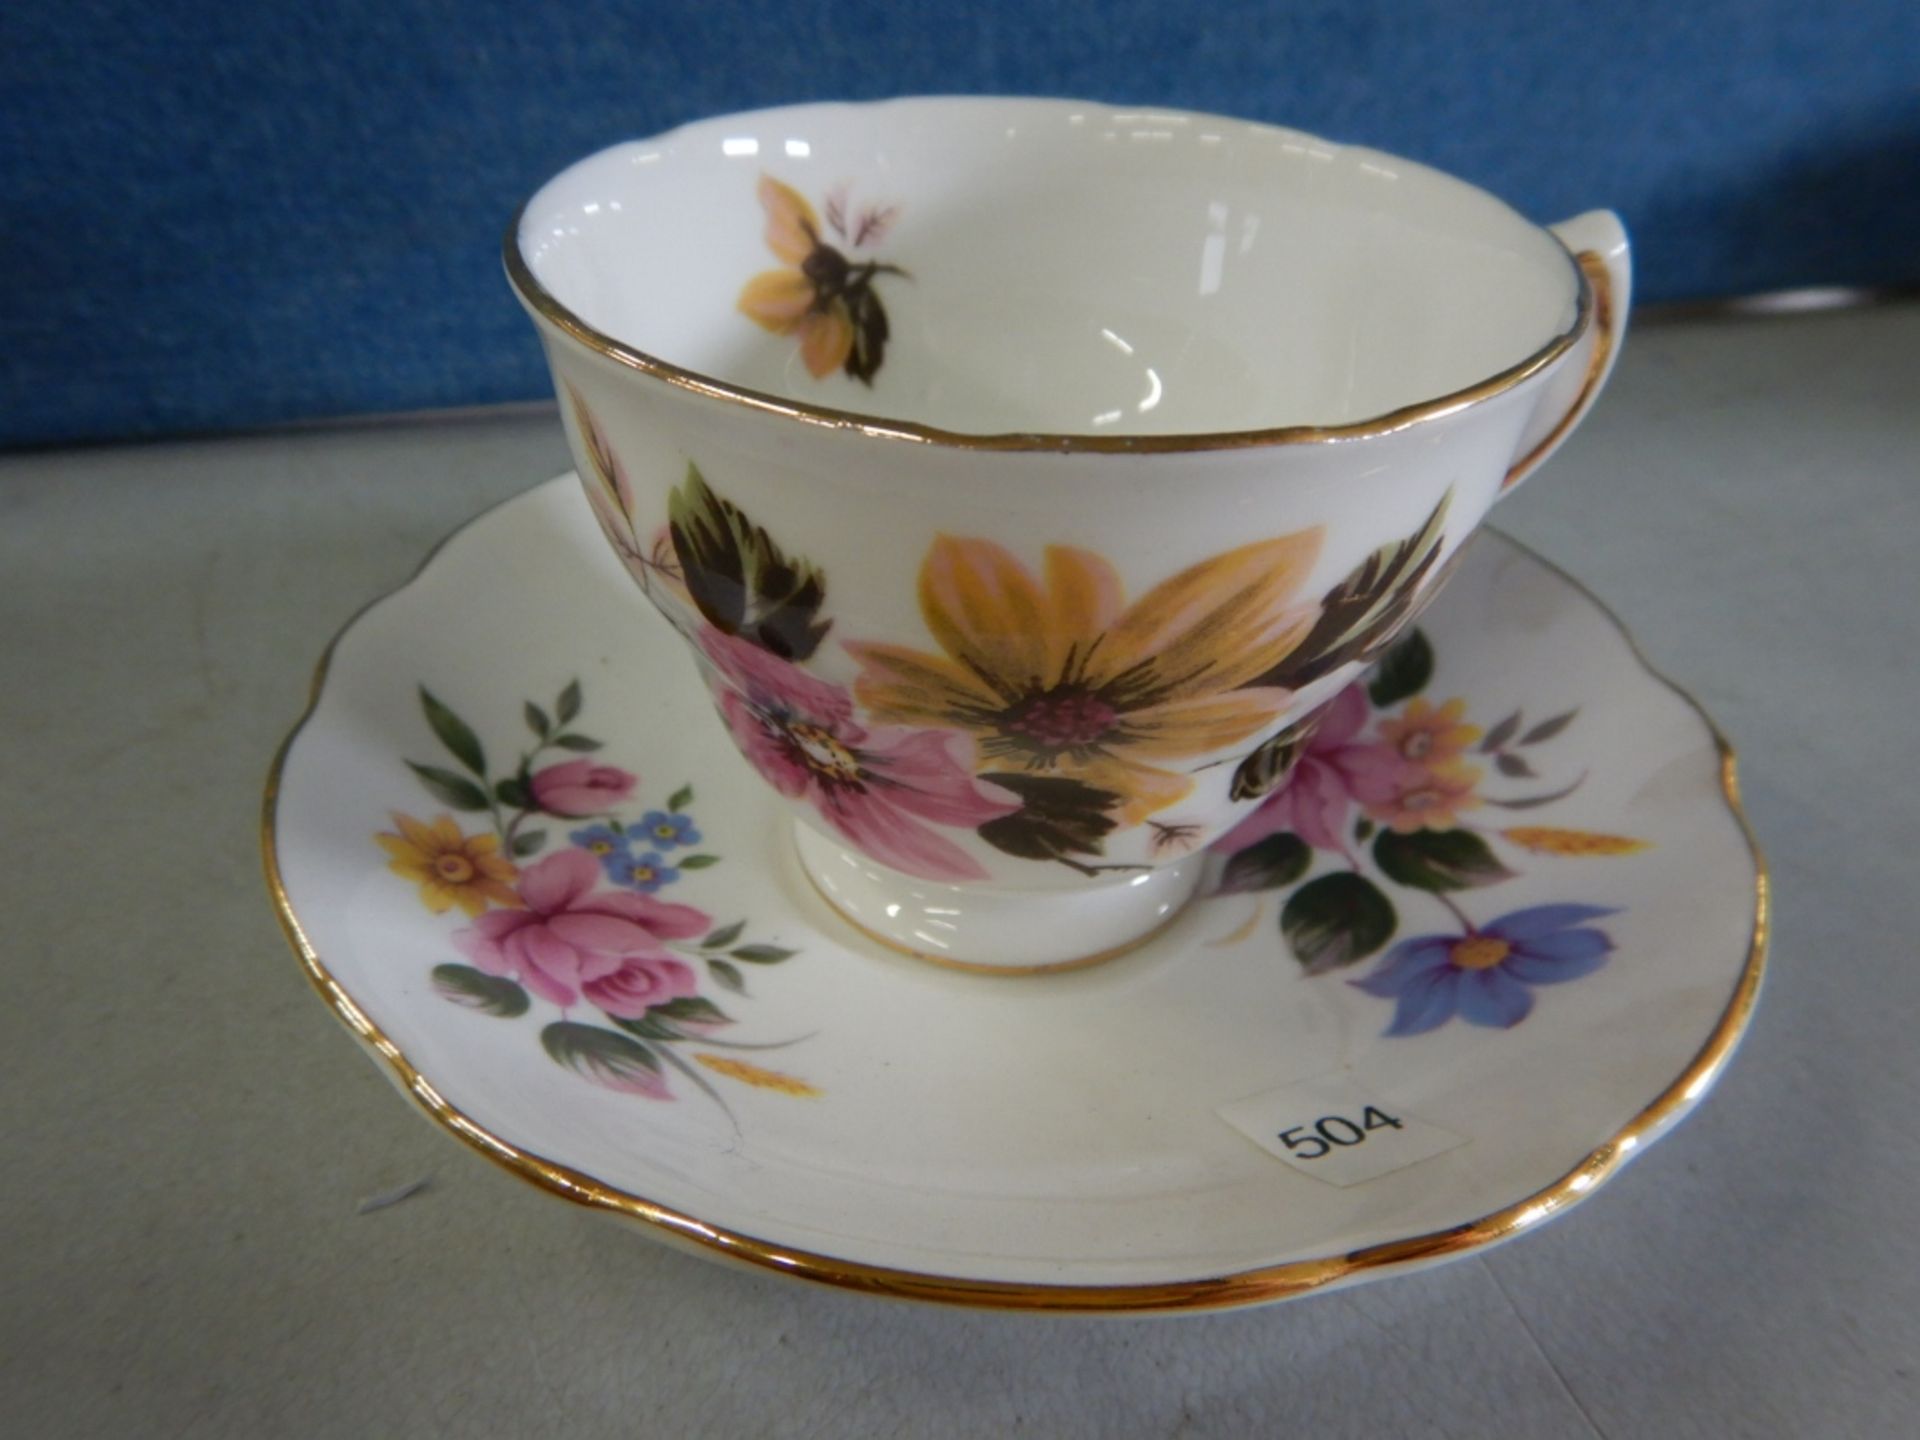 ANTIQUE TEACUPS & SAUCERS - MADE IN ENGLAND - LOT OF 7 - BONE CHINA #8273 - YELLOW FLOWERS, # - Image 25 of 33